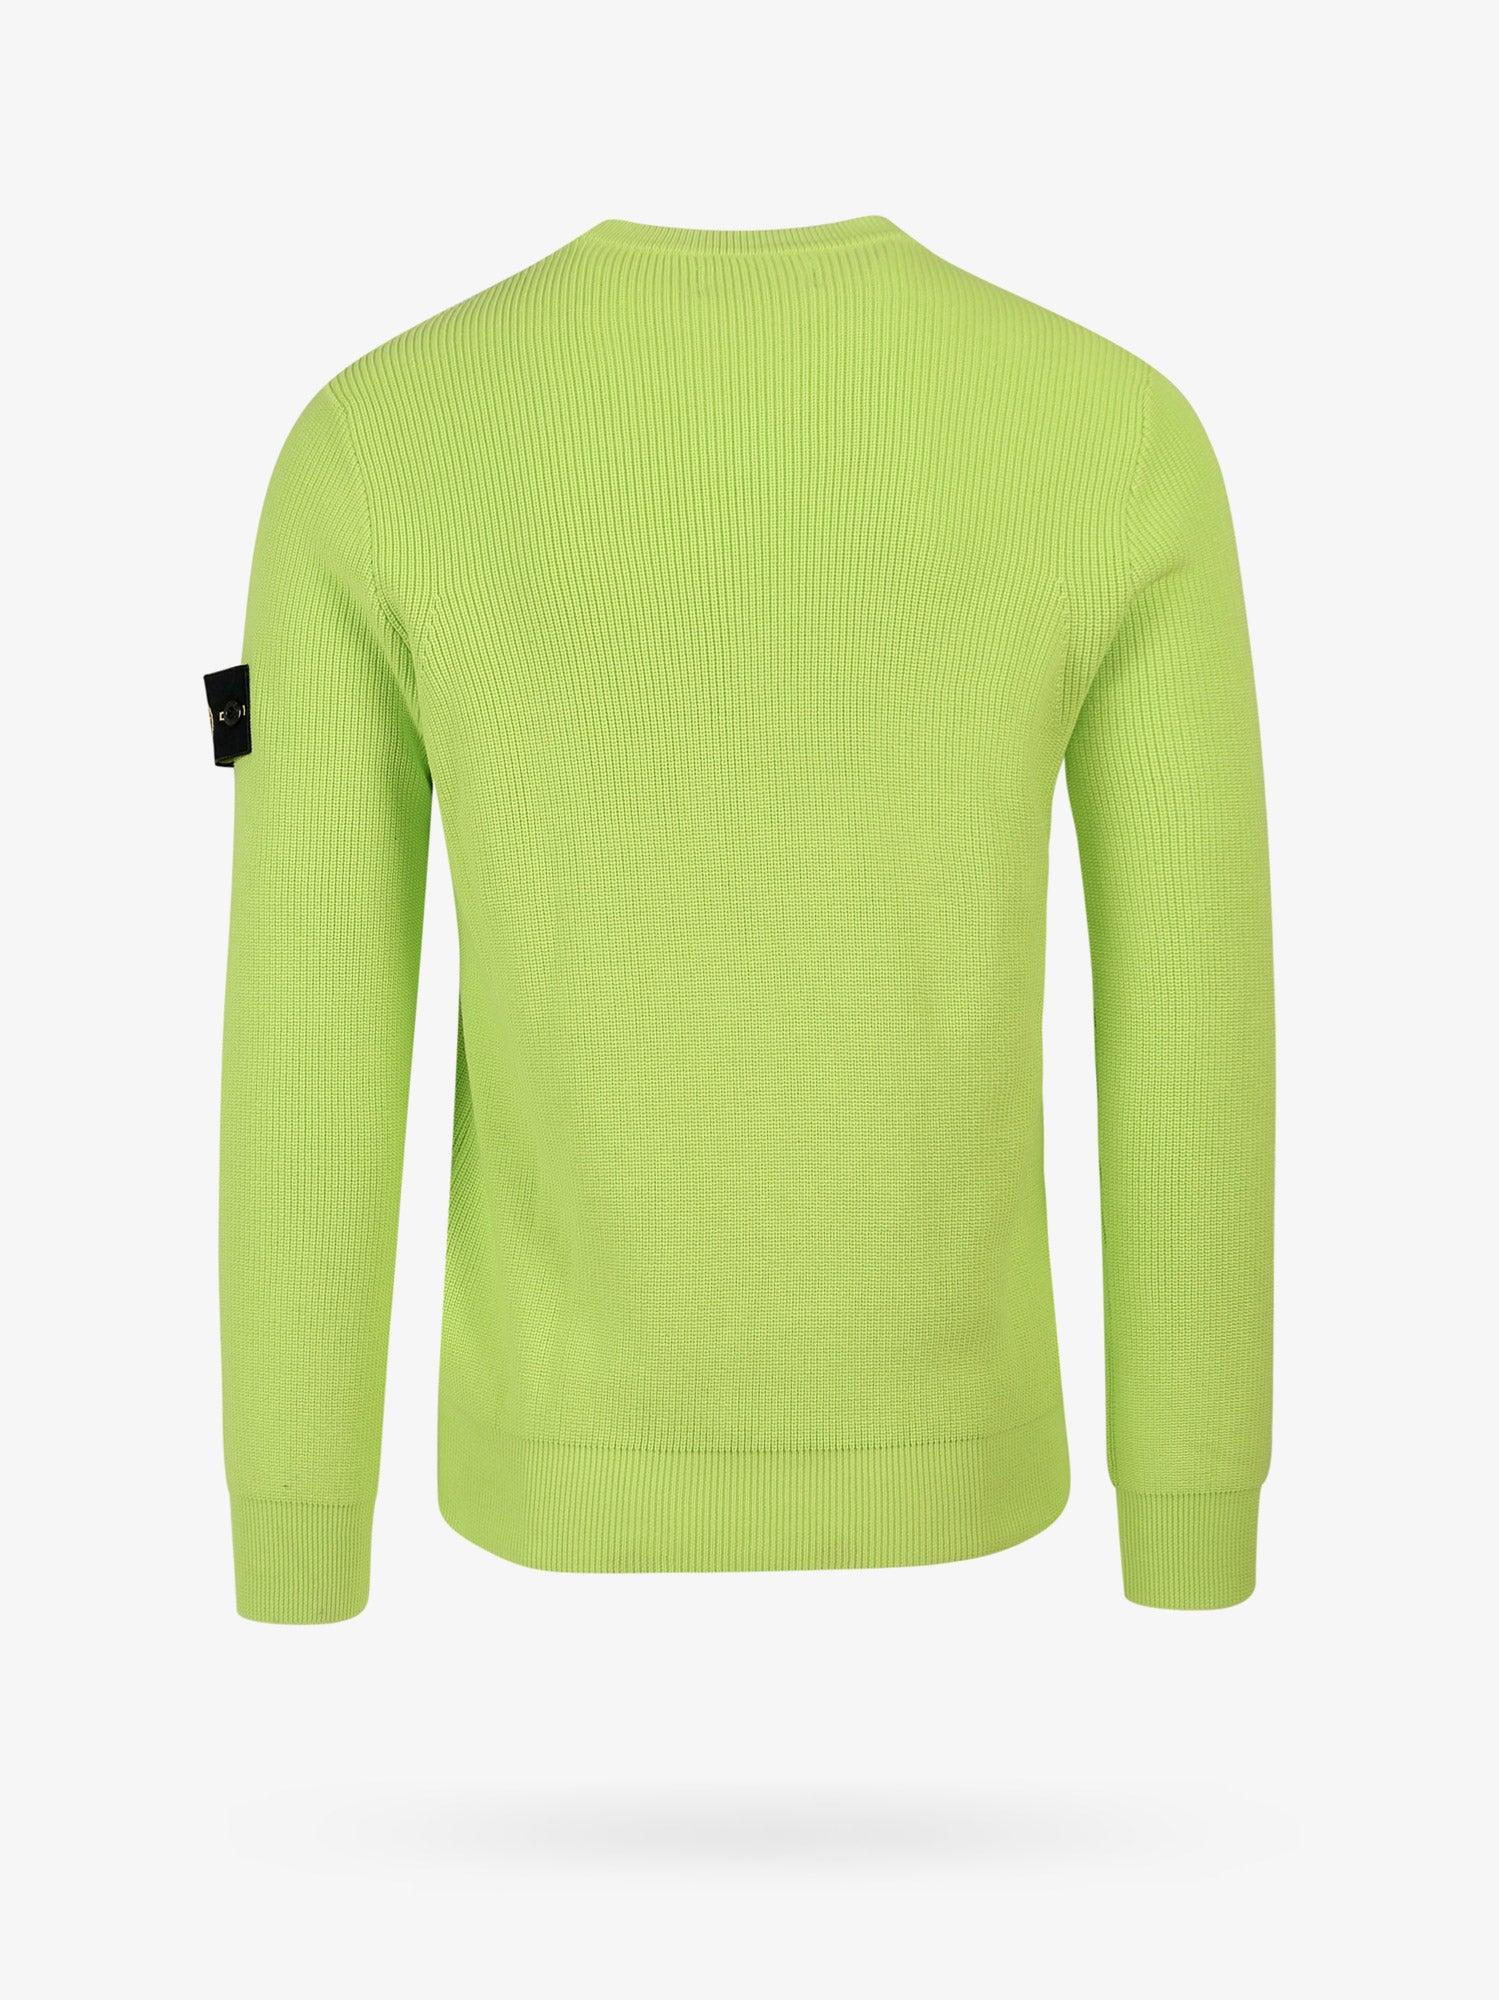 Stone Island Cotton Sweater in Green for Men - Lyst